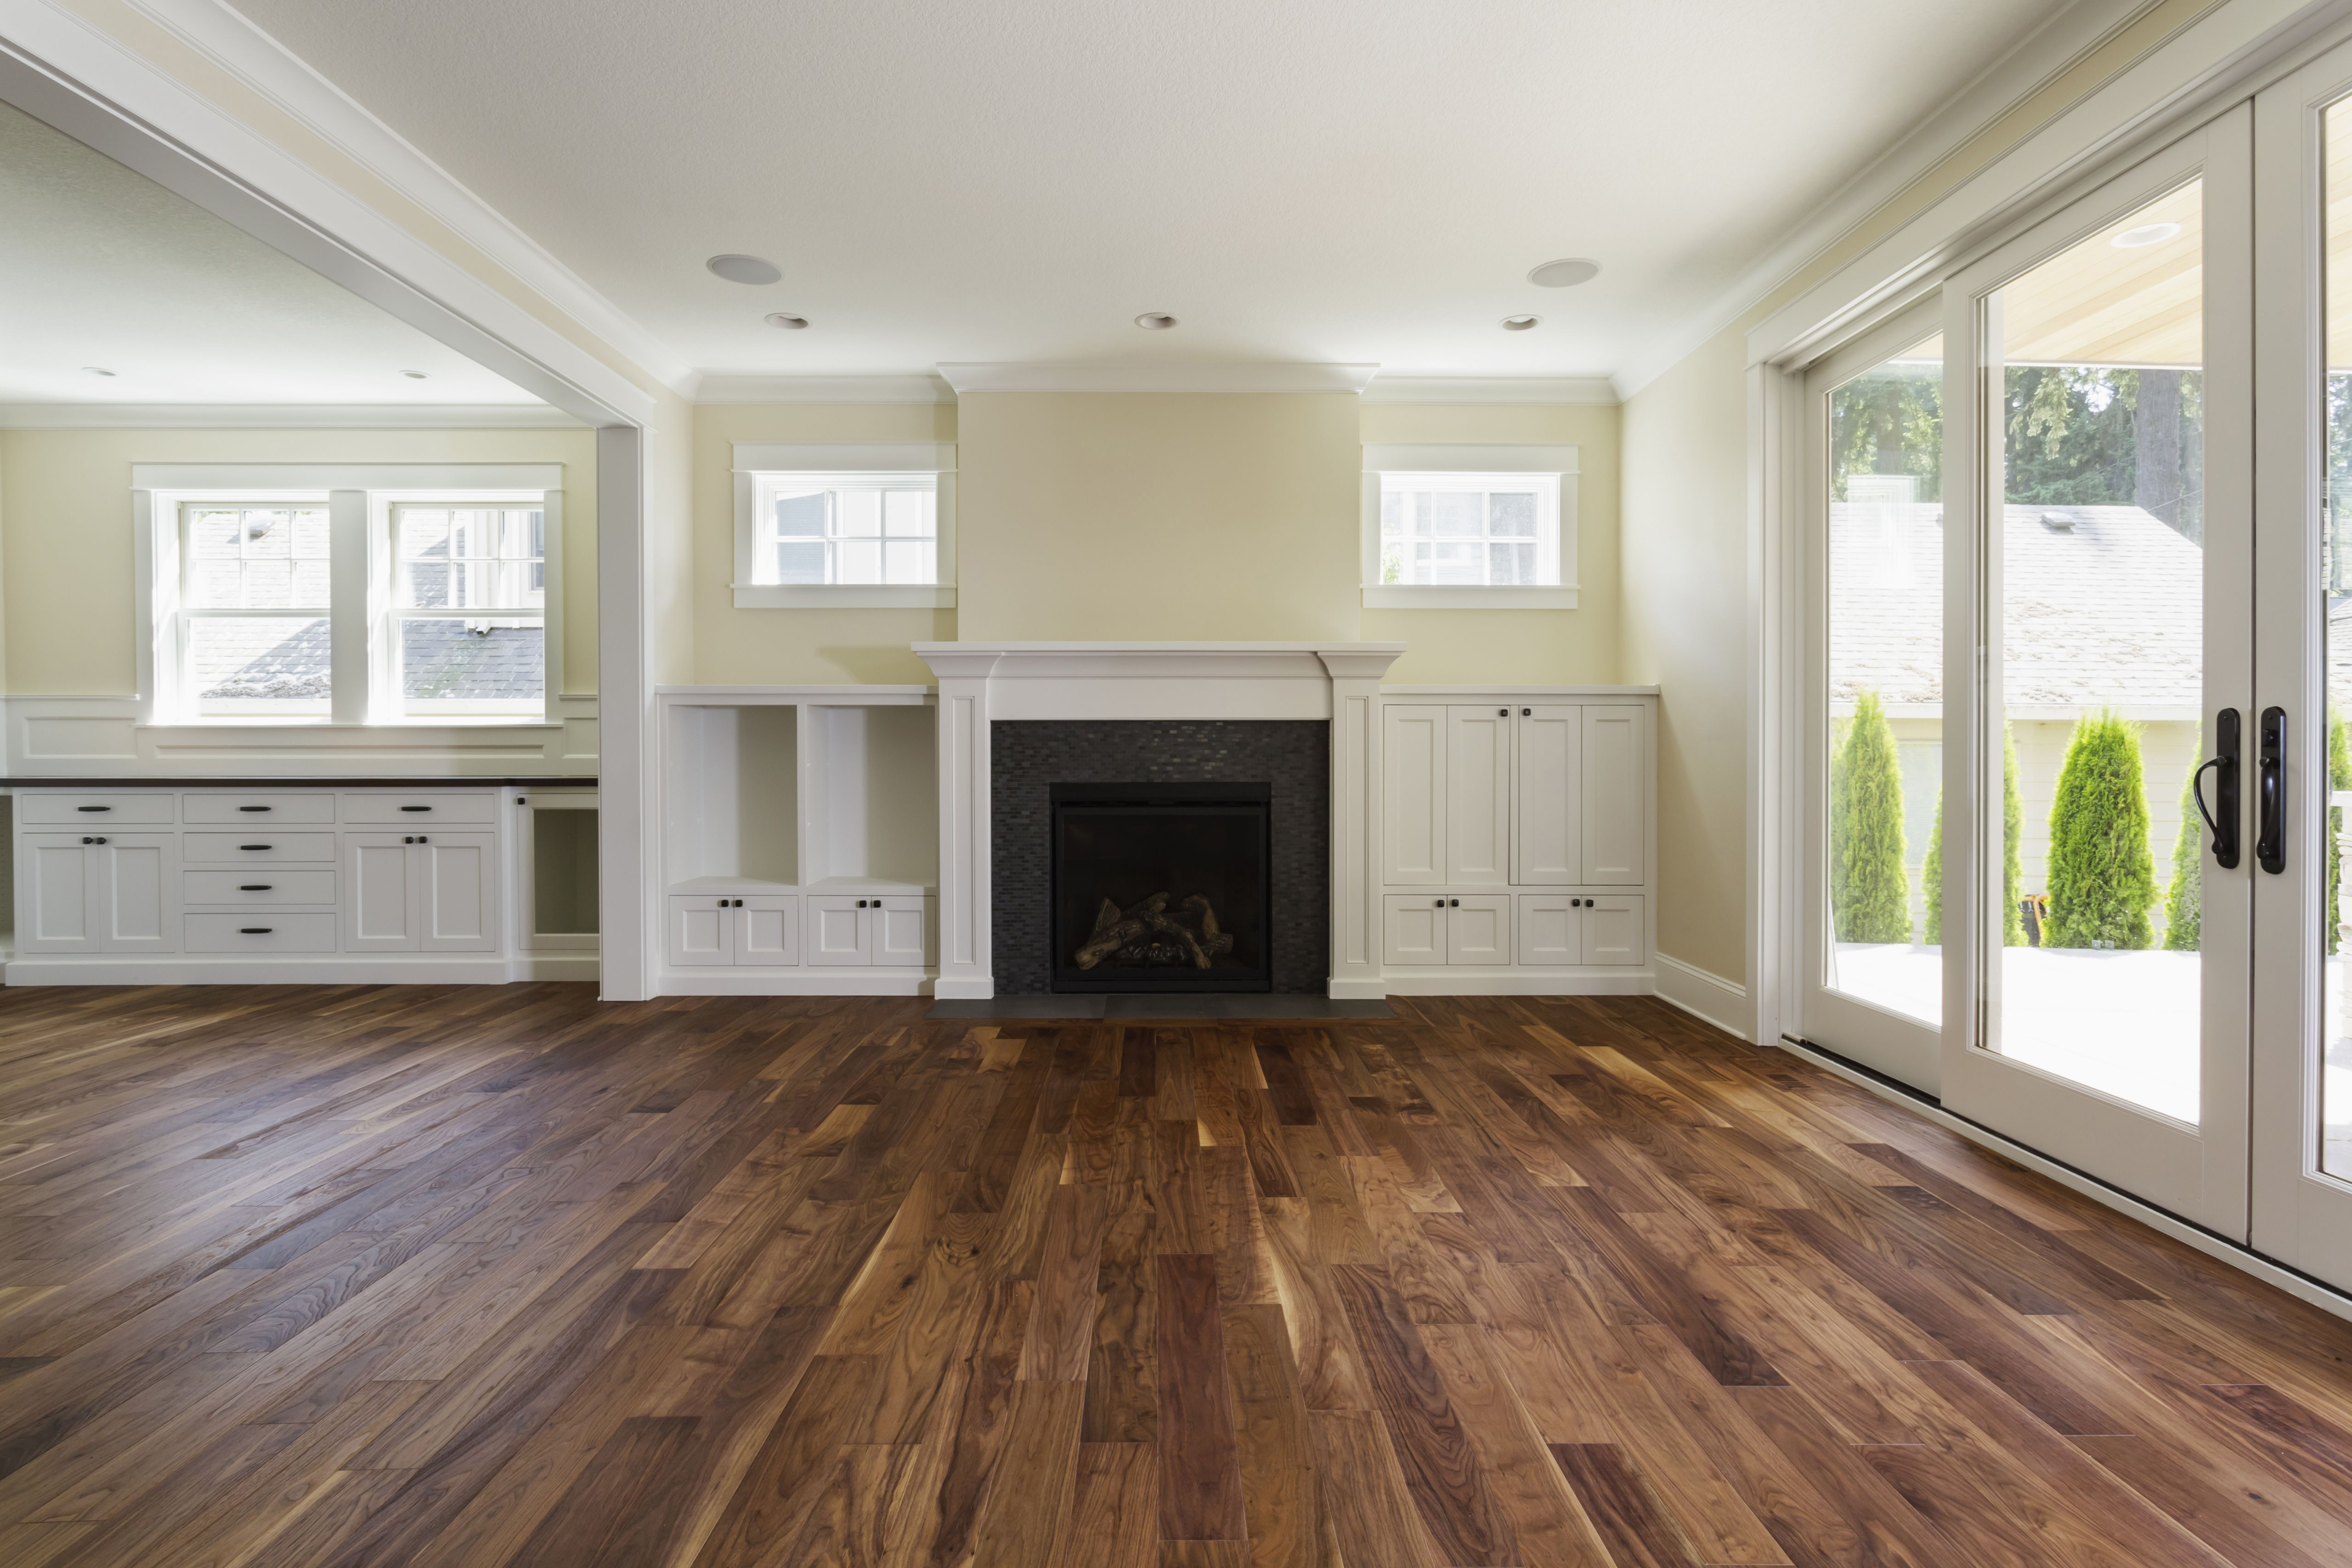 17 Fabulous Cost to Install Prefinished Hardwood Floors 2024 free download cost to install prefinished hardwood floors of the pros and cons of prefinished hardwood flooring regarding fireplace and built in shelves in living room 482143011 57bef8e33df78cc16e035397